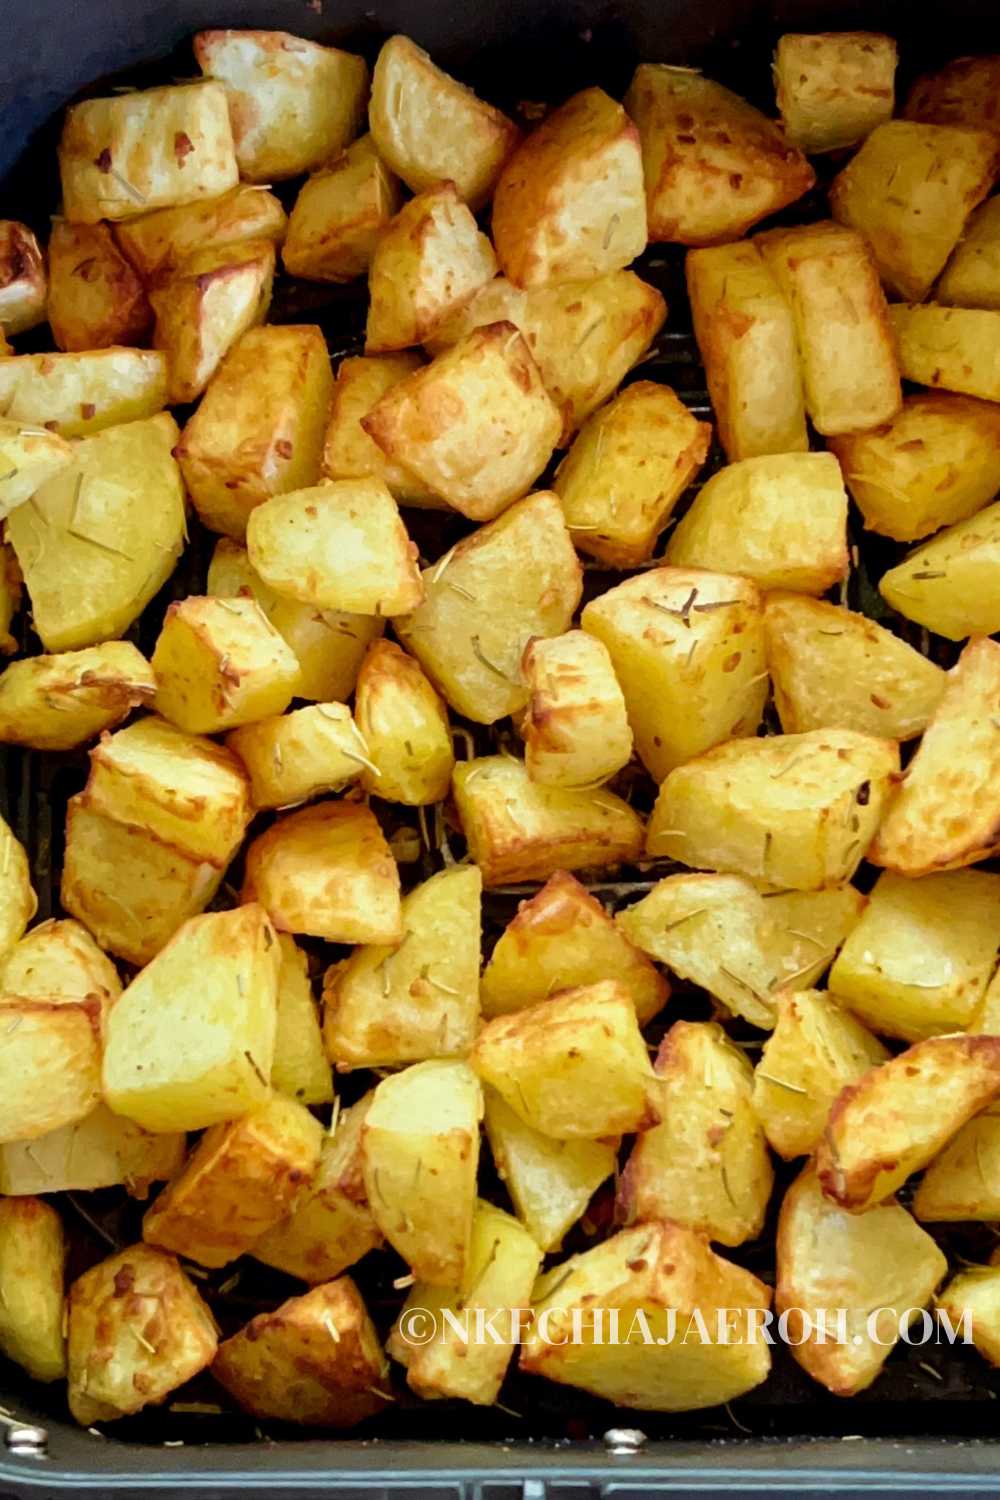 Air fryer roasted potatoes are perfect for the holidays, and the amazing flavors of garlic and rosemary make this dish incredibly flavorful and inviting! These air fryer baked potatoes with rosemary, and garlic are vegan, gluten-free, and super tasty. Crispy cubes of air-fried potatoes with a tender, fluffy center are the side dish you need for any meal. Serve air fryer potato cubes with chicken, lamb, salmon, or steak. #potatoes #easyrecipes #airfryerrecipes